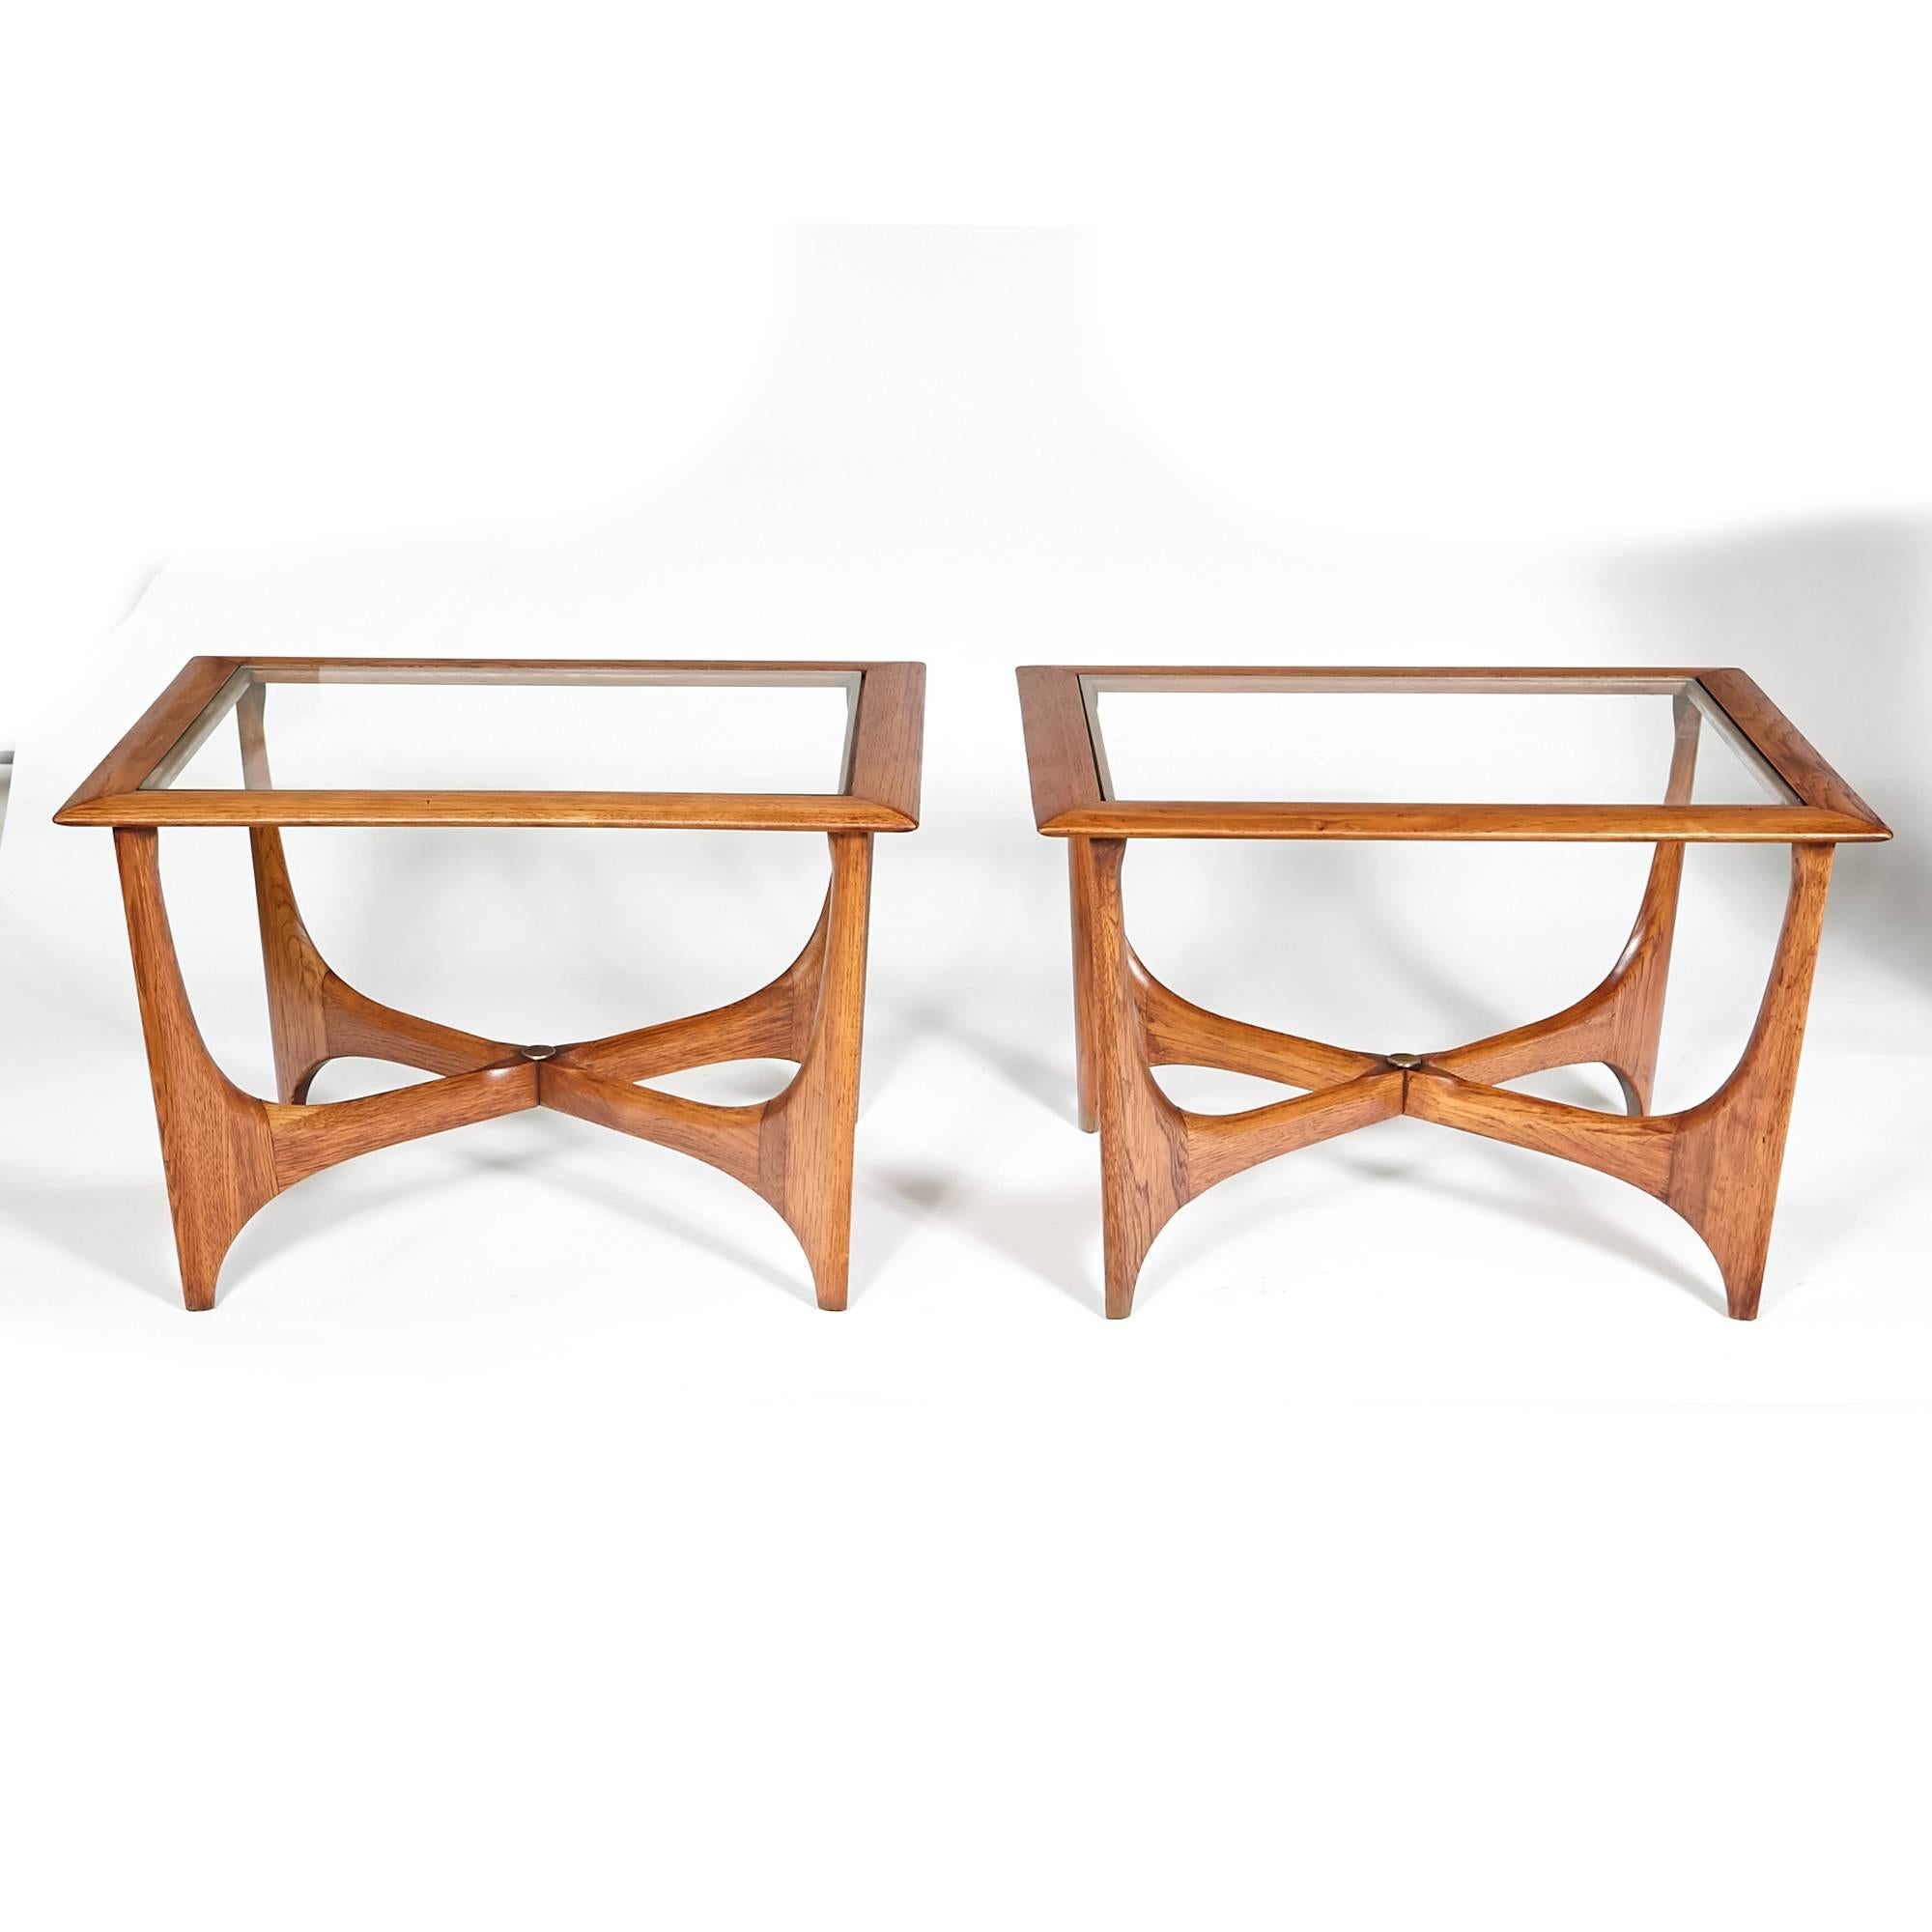 Pair of 1960s rectangular sculpted walnut and glass top side tables by Lane Furniture Co. Marked. Refinished condition.